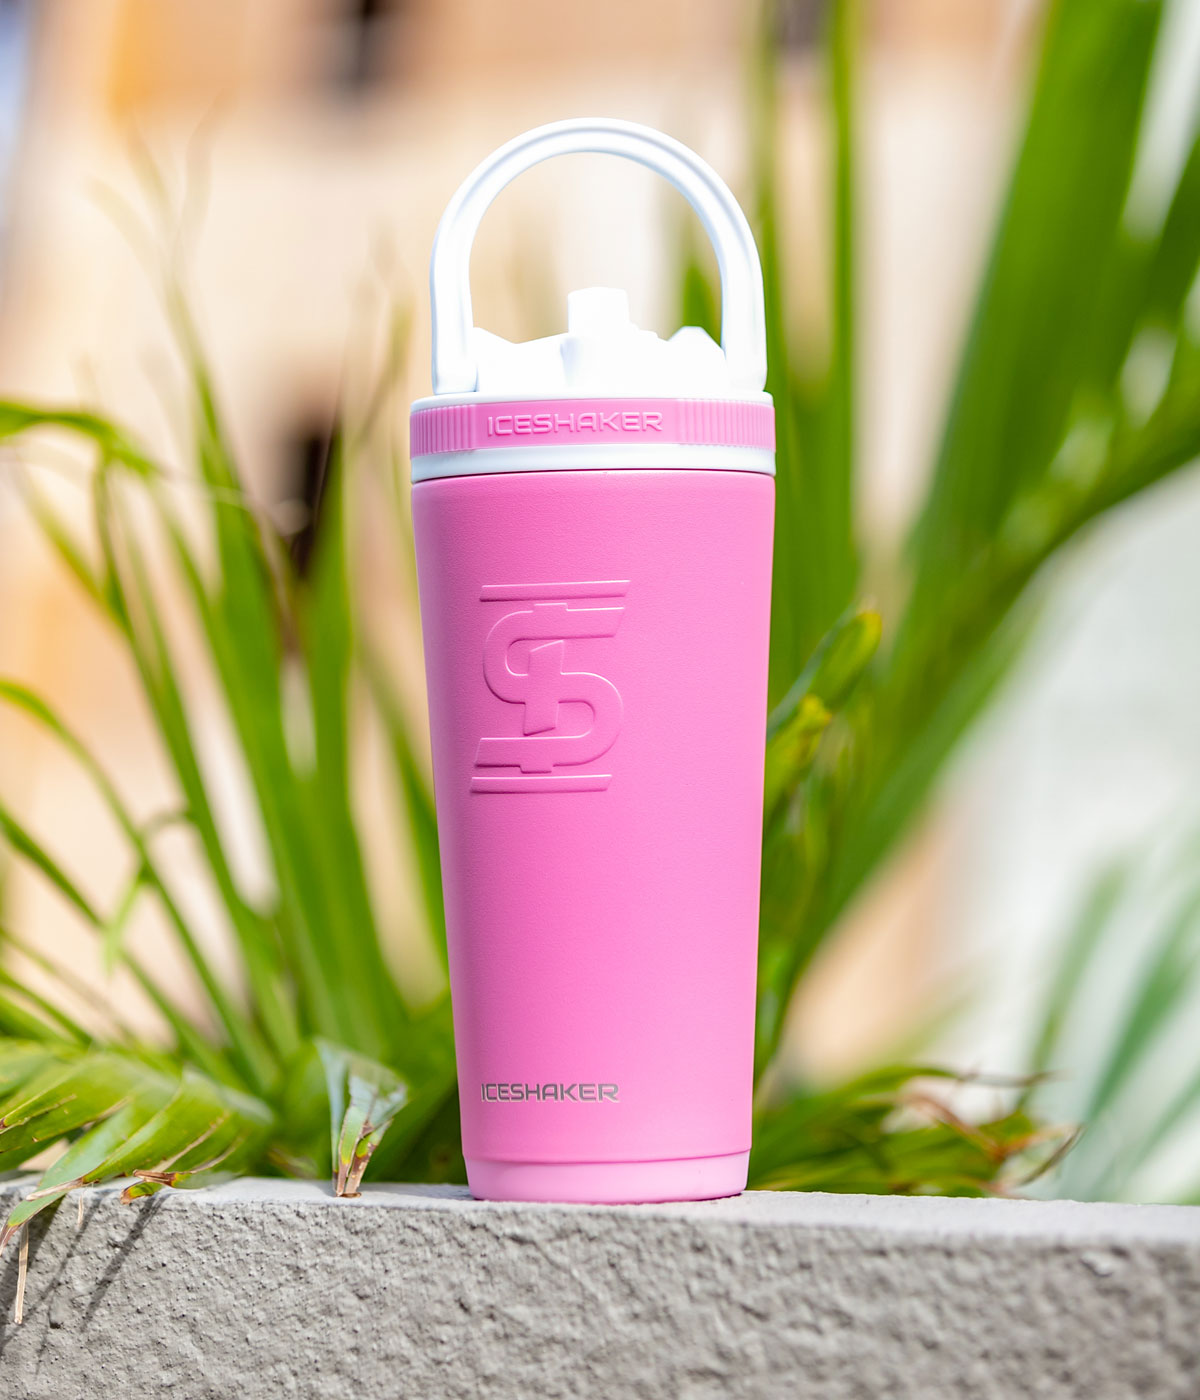 An image of a pink-colored 26oz Sport Bottle sitting on concrete. There is green plants in the background.